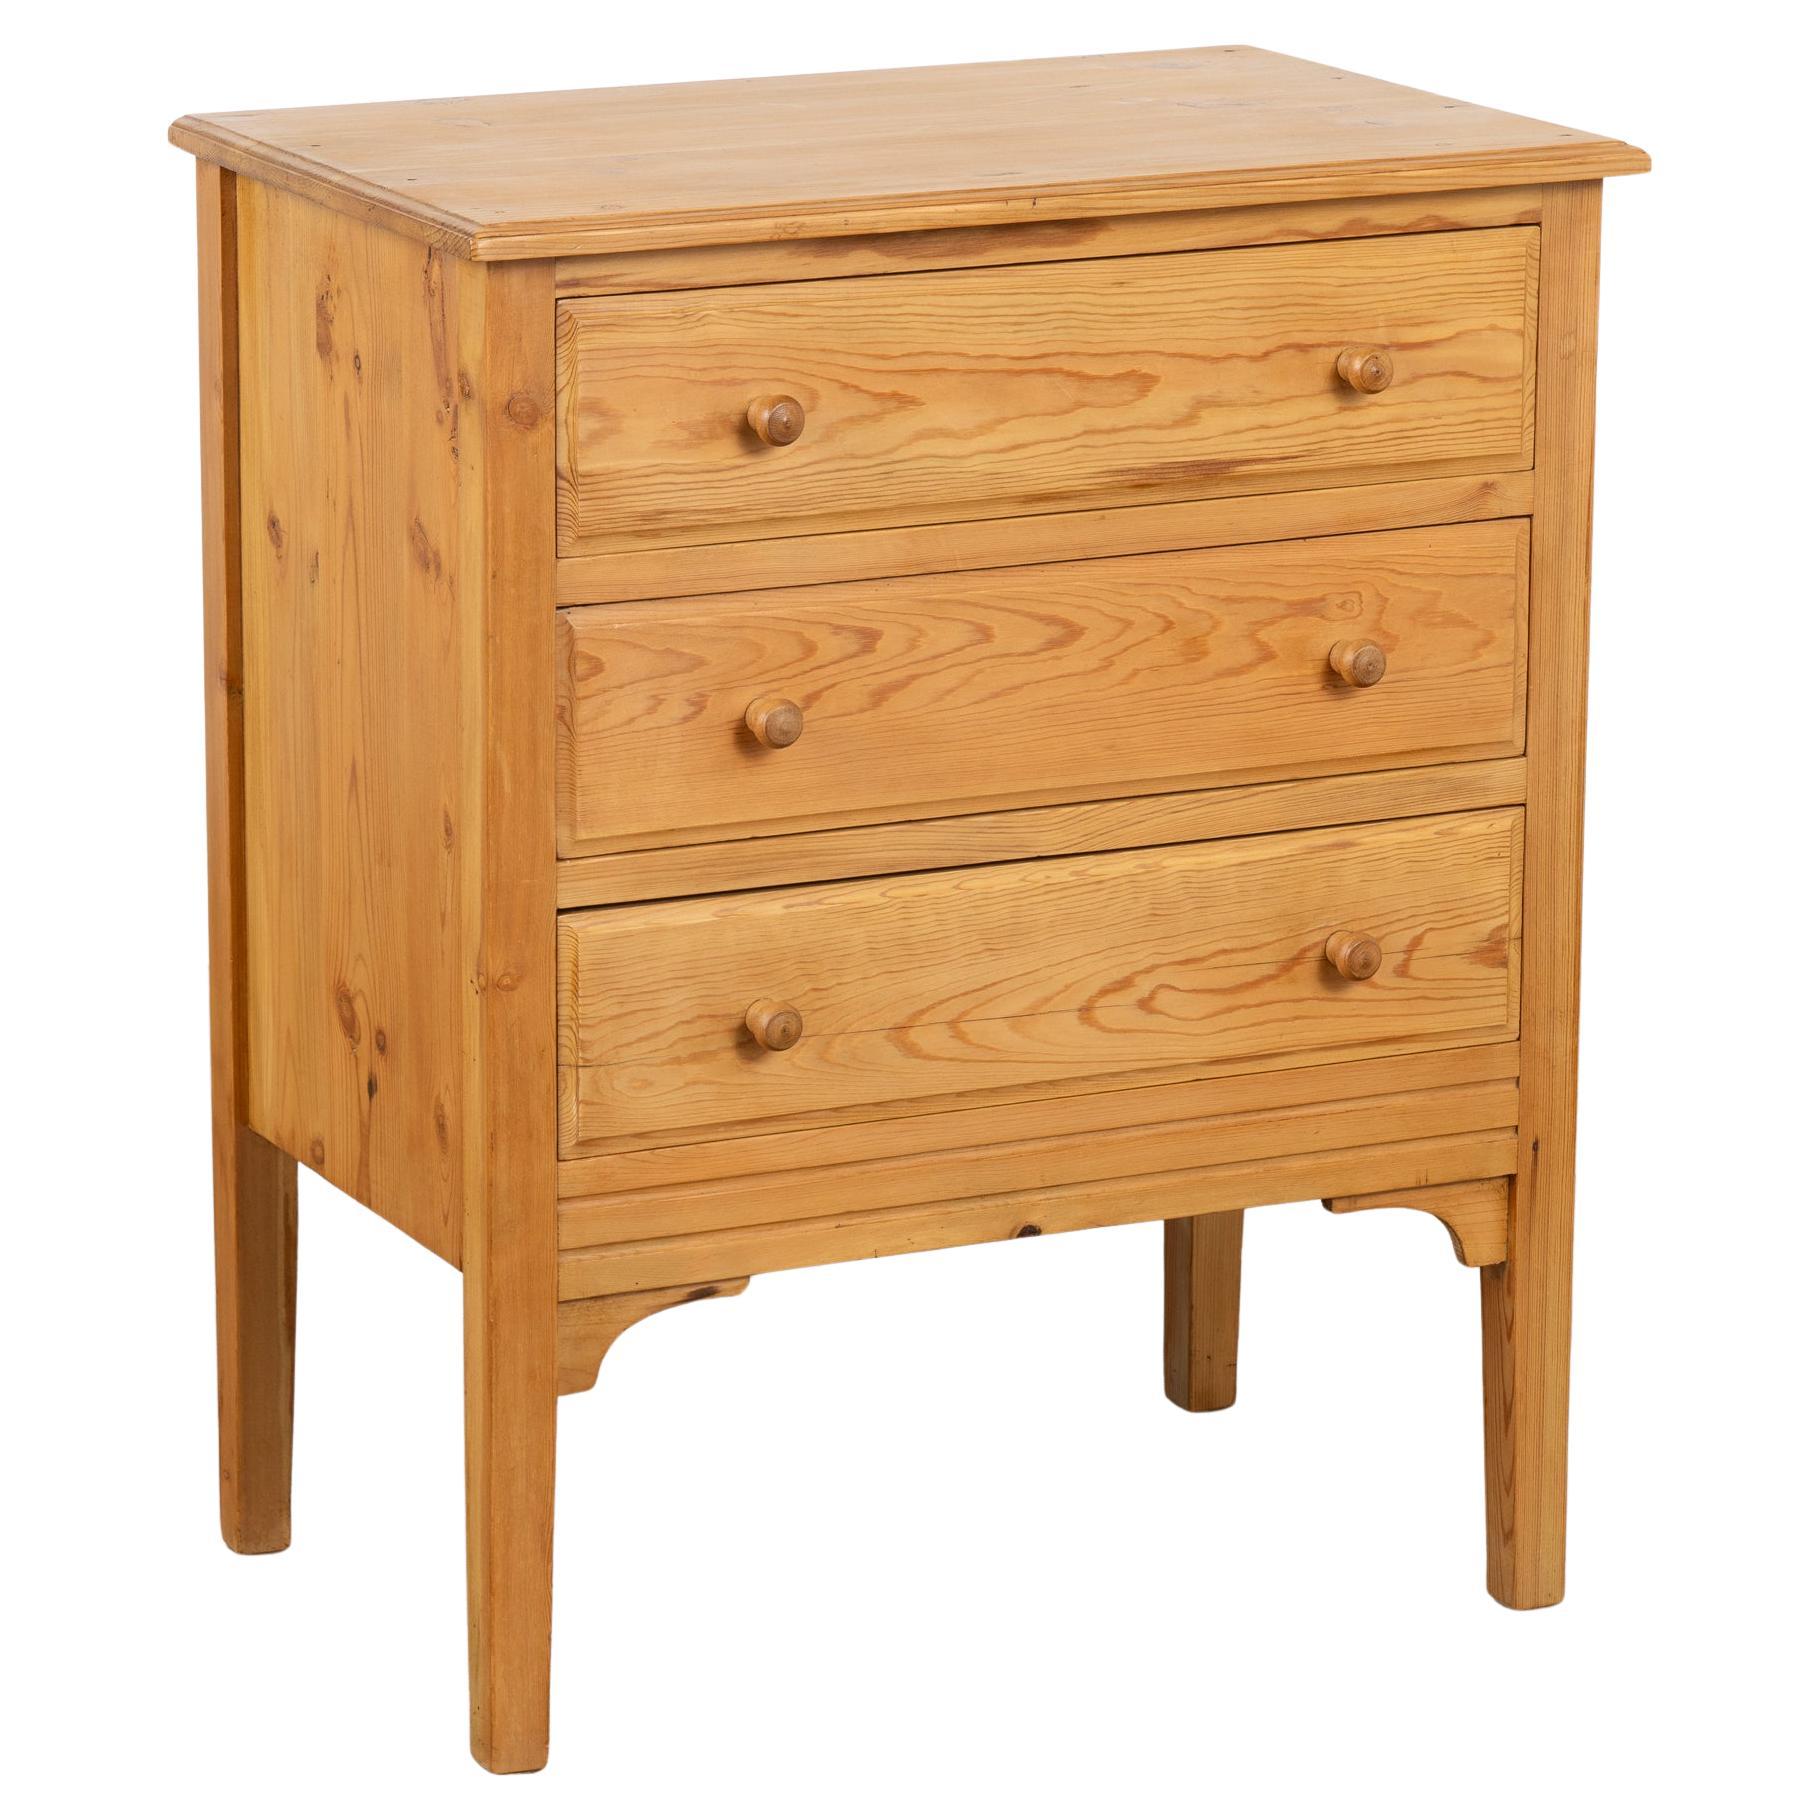 Vintage Pine Small Chest of Drawers Nightstand, Denmark circa 1940